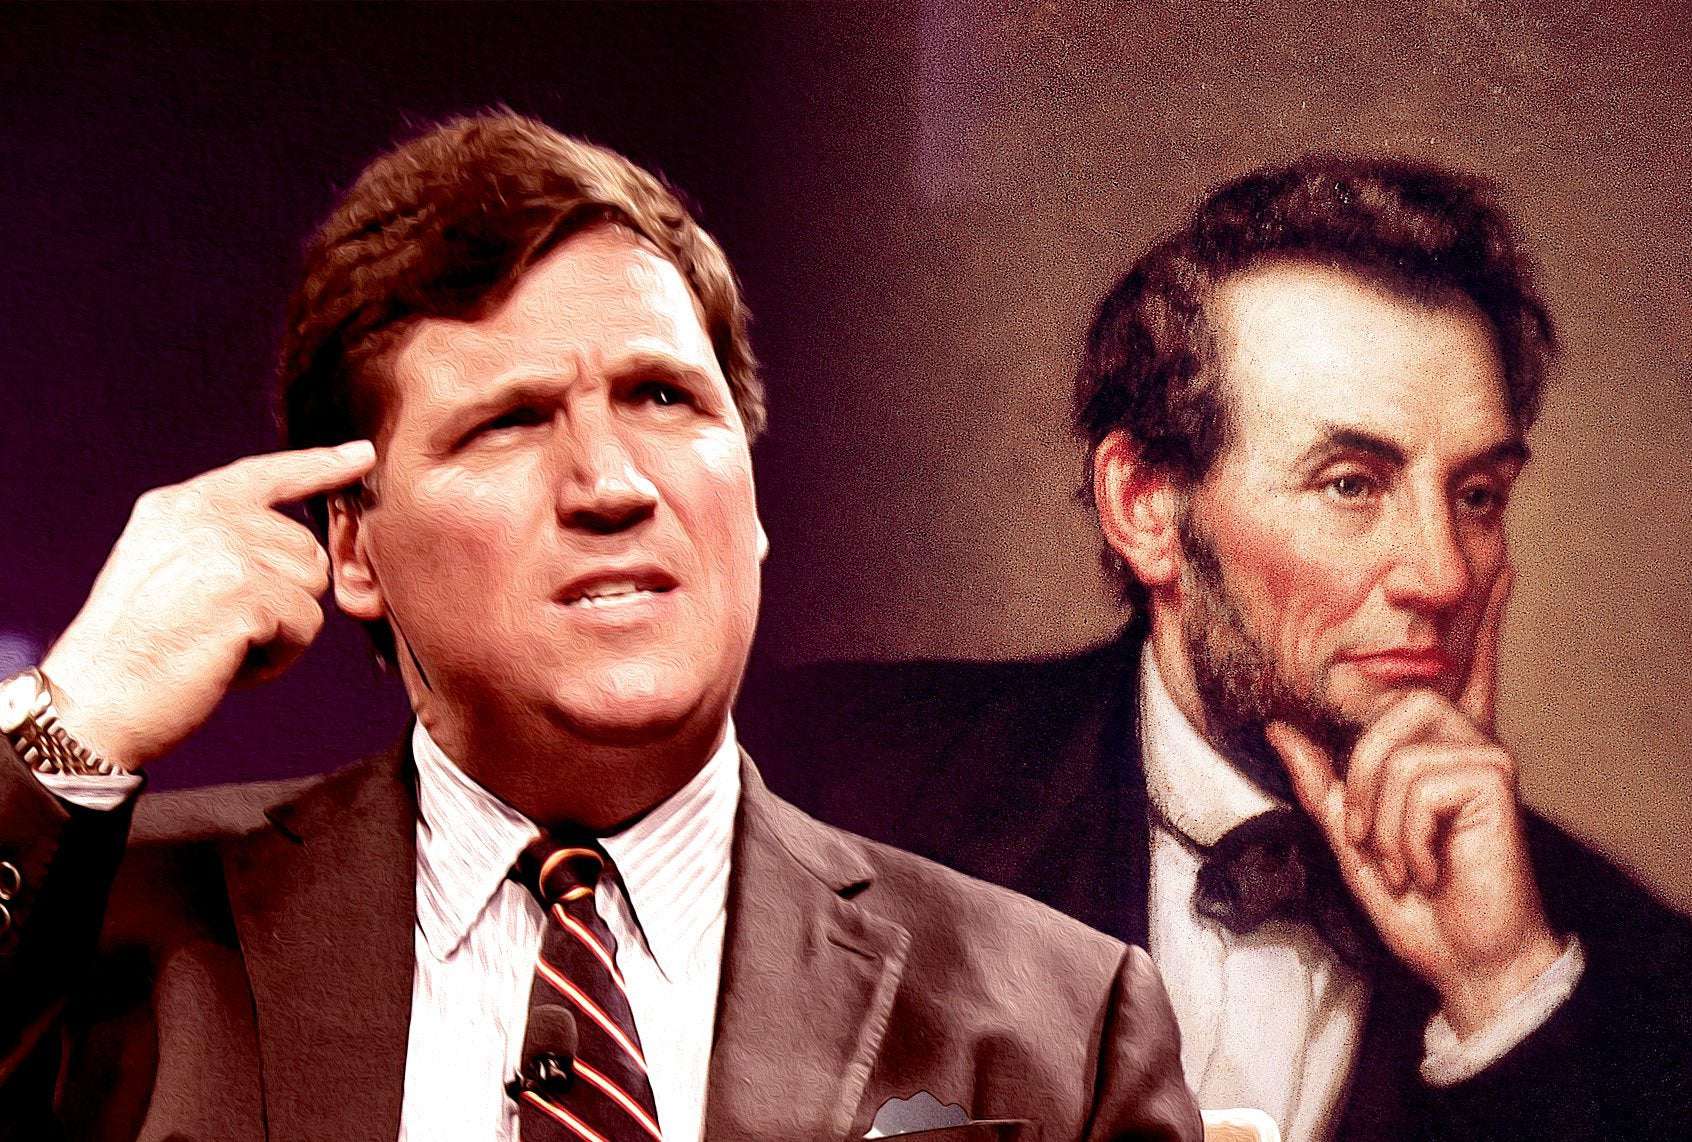 image for Republicans still try to claim Abe Lincoln's heritage — that's offensive and absurd